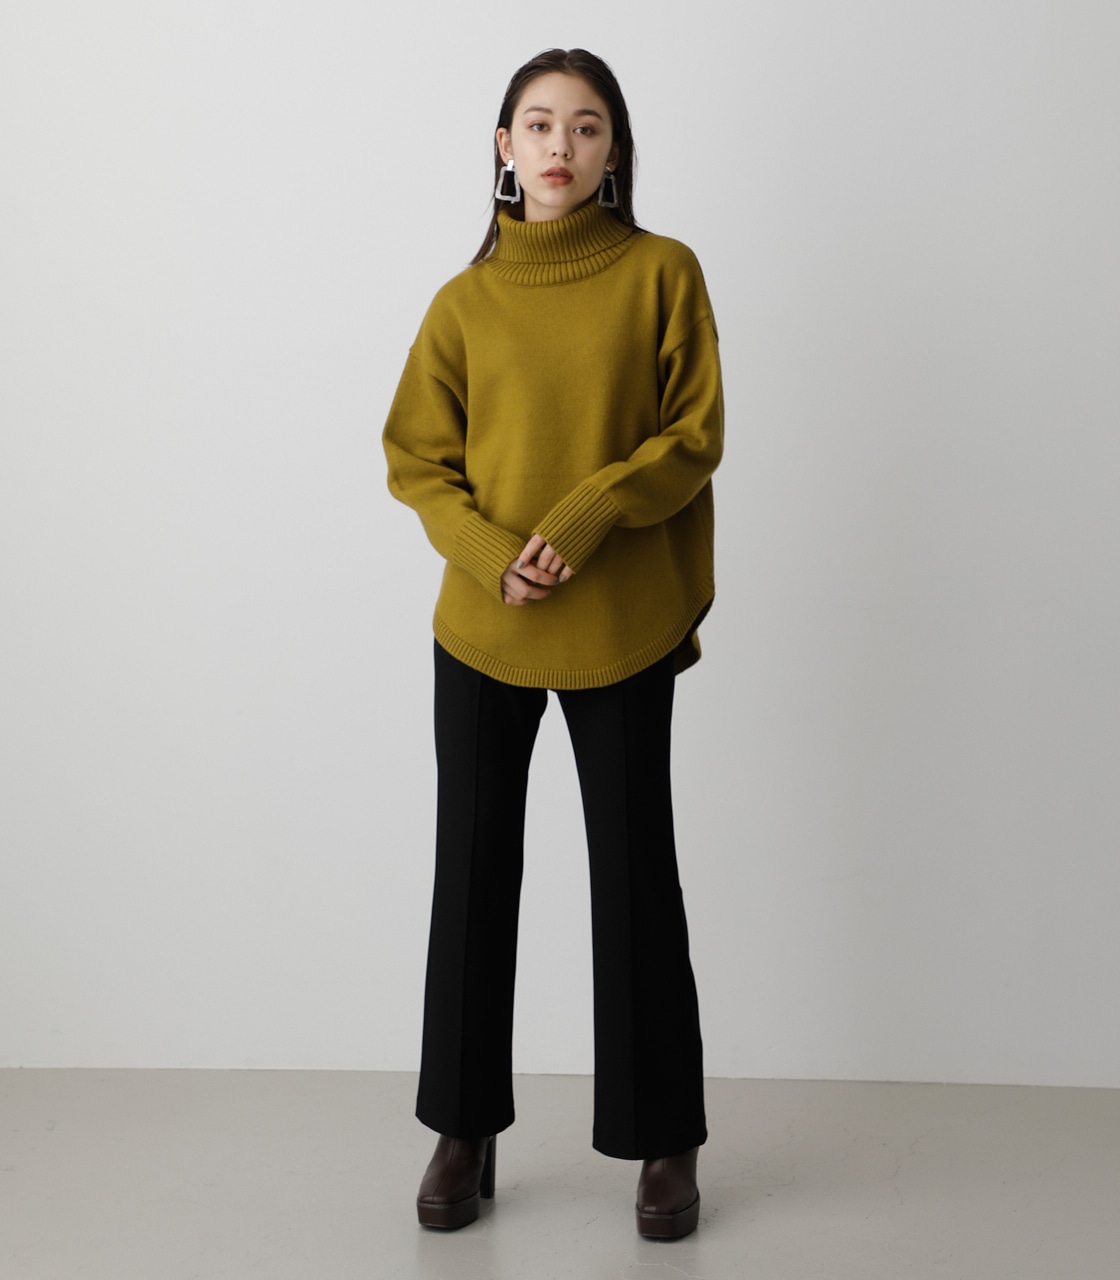 BIG TURTLE KNIT TOPS/ビッグタートルニットトップス 詳細画像 LIME 3